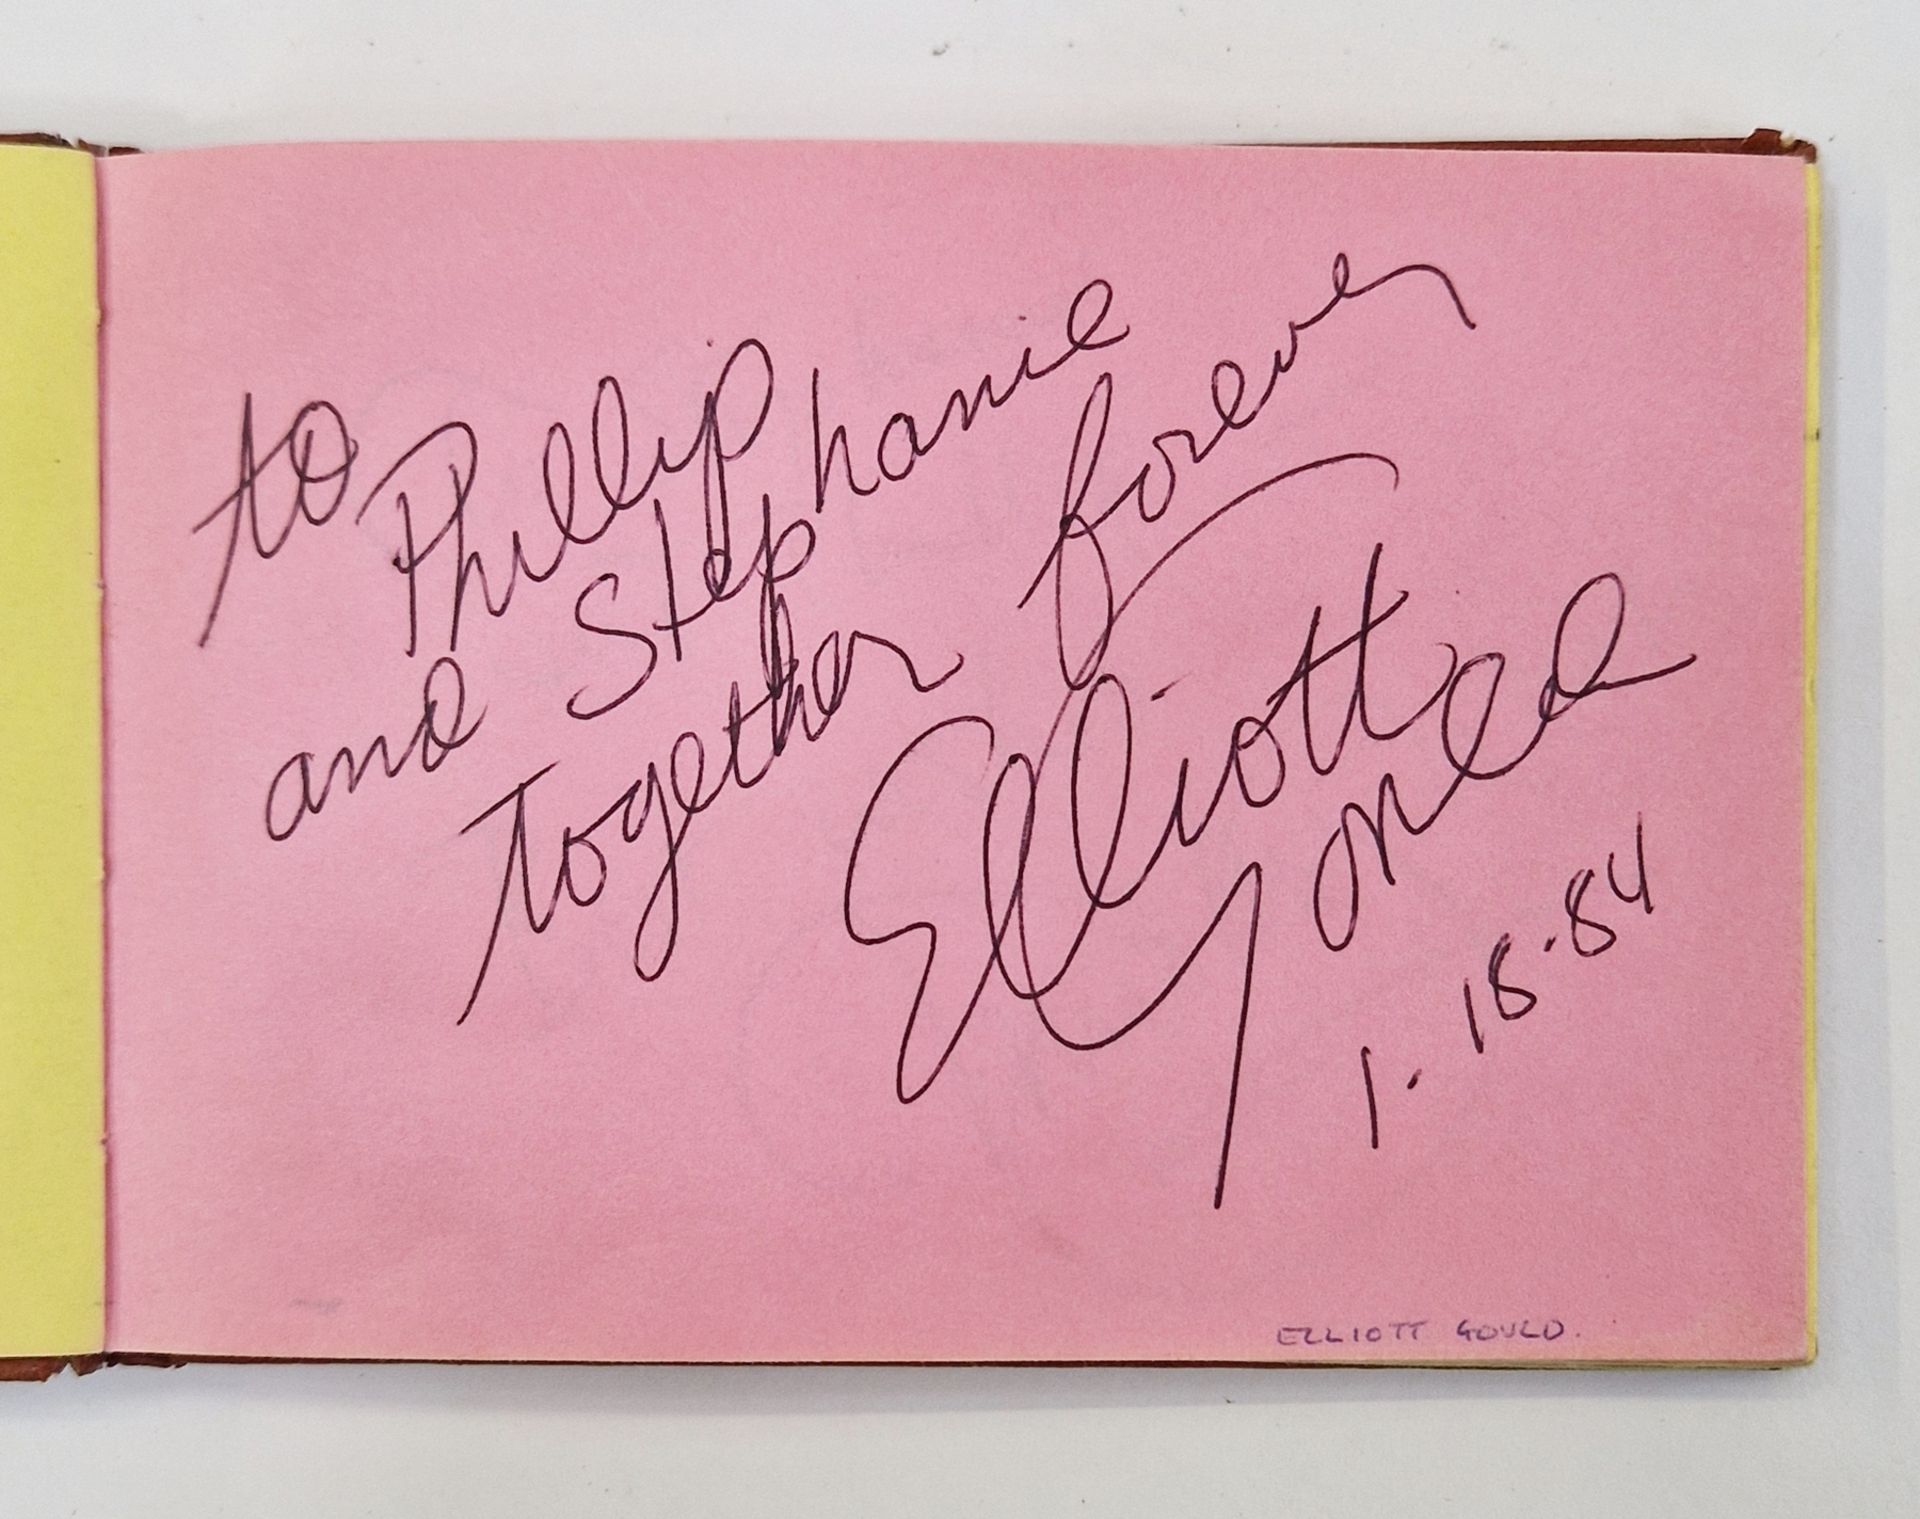 Autograph album, 20th century, to include actors, singers and other celebrities, including Elton - Image 5 of 20